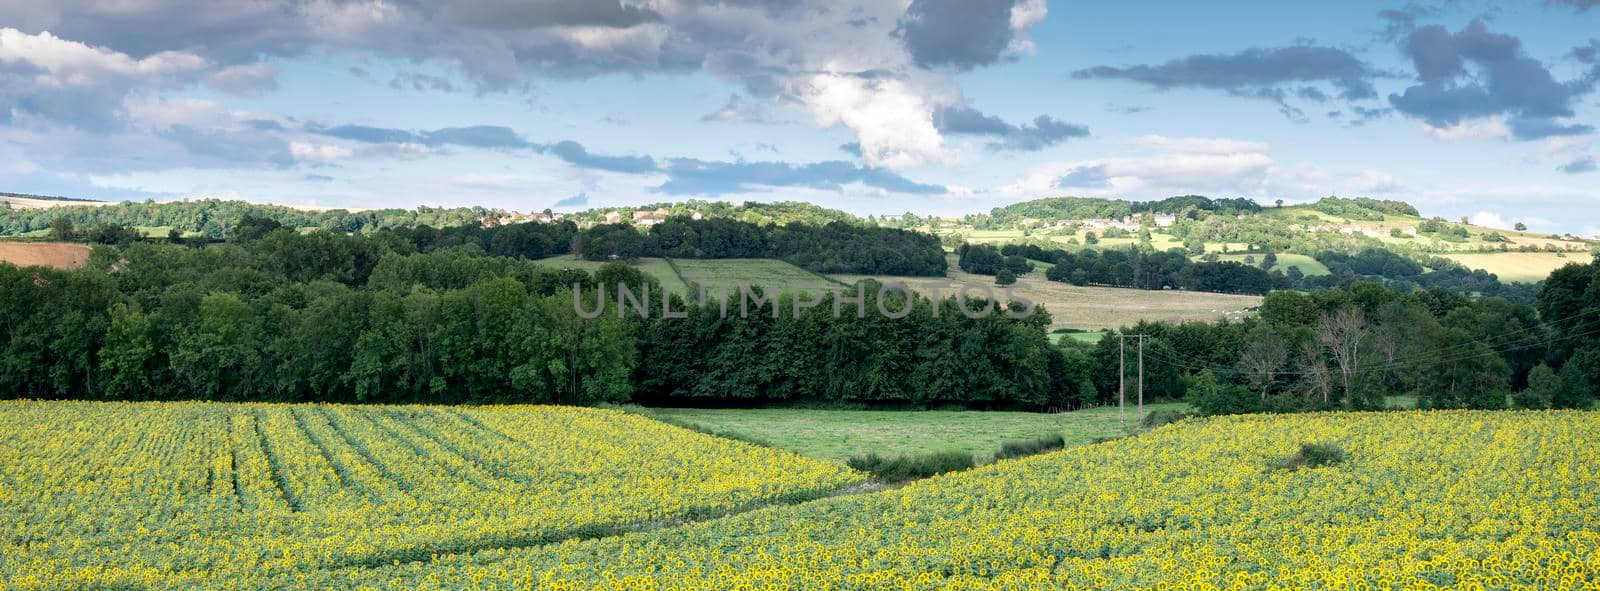 rural landscape of french morvan with sunflowers under blue sky with clouds